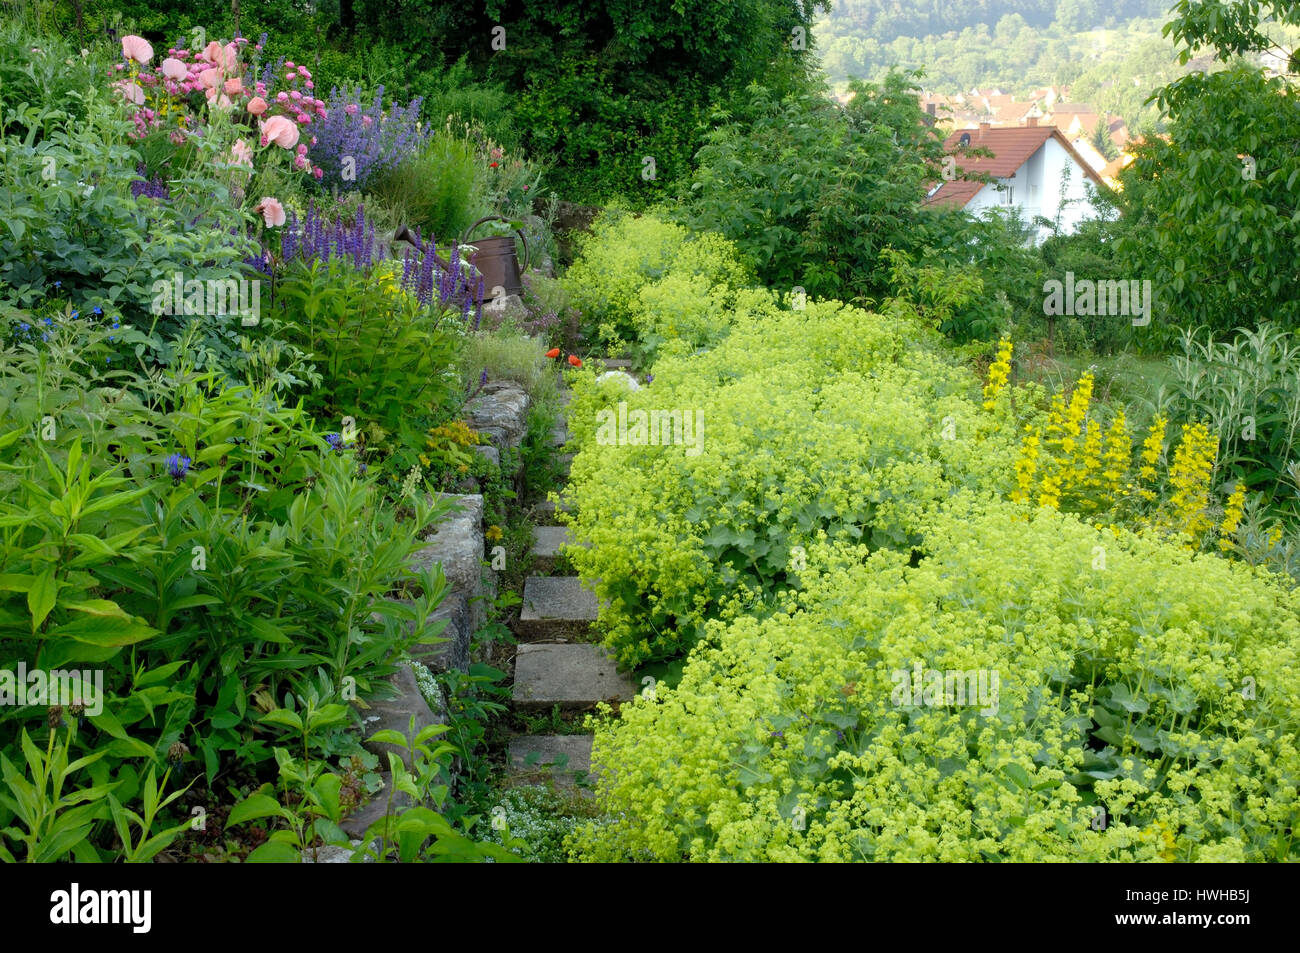 Guards path with lady see Mantle, Alchemilla vulgaris, garden path with women's coat, Alchemilla vulgaris , Garden path with Lady's Mantle / (Alchemil Stock Photo